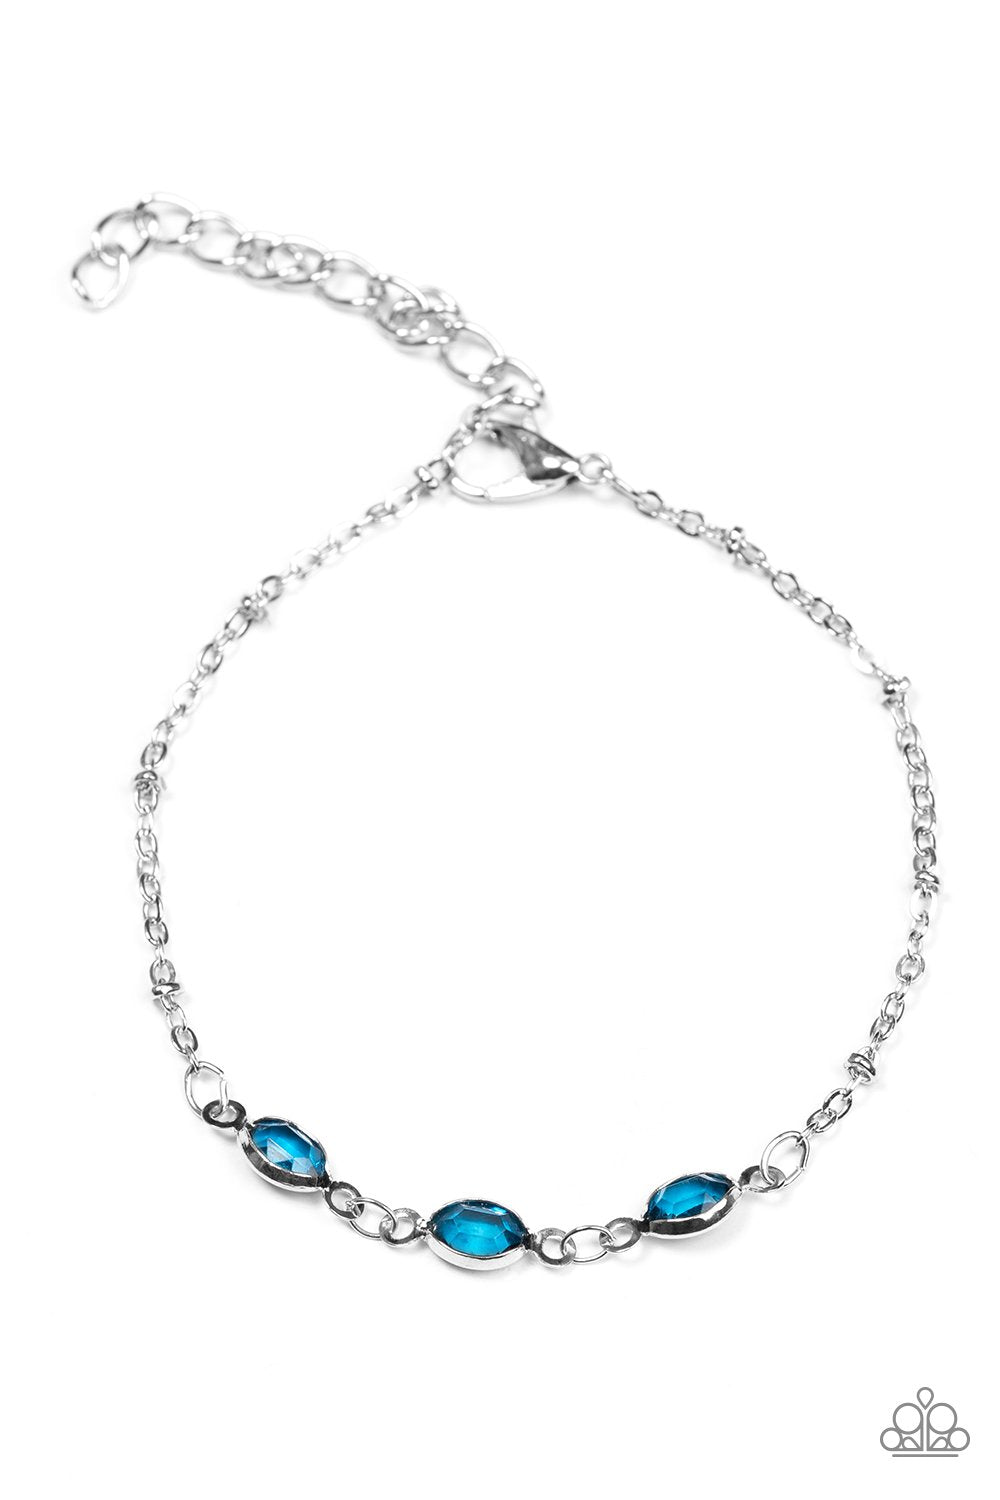 Center Stage Chic Blue Bracelet - Paparazzi Accessories-CarasShop.com - $5 Jewelry by Cara Jewels